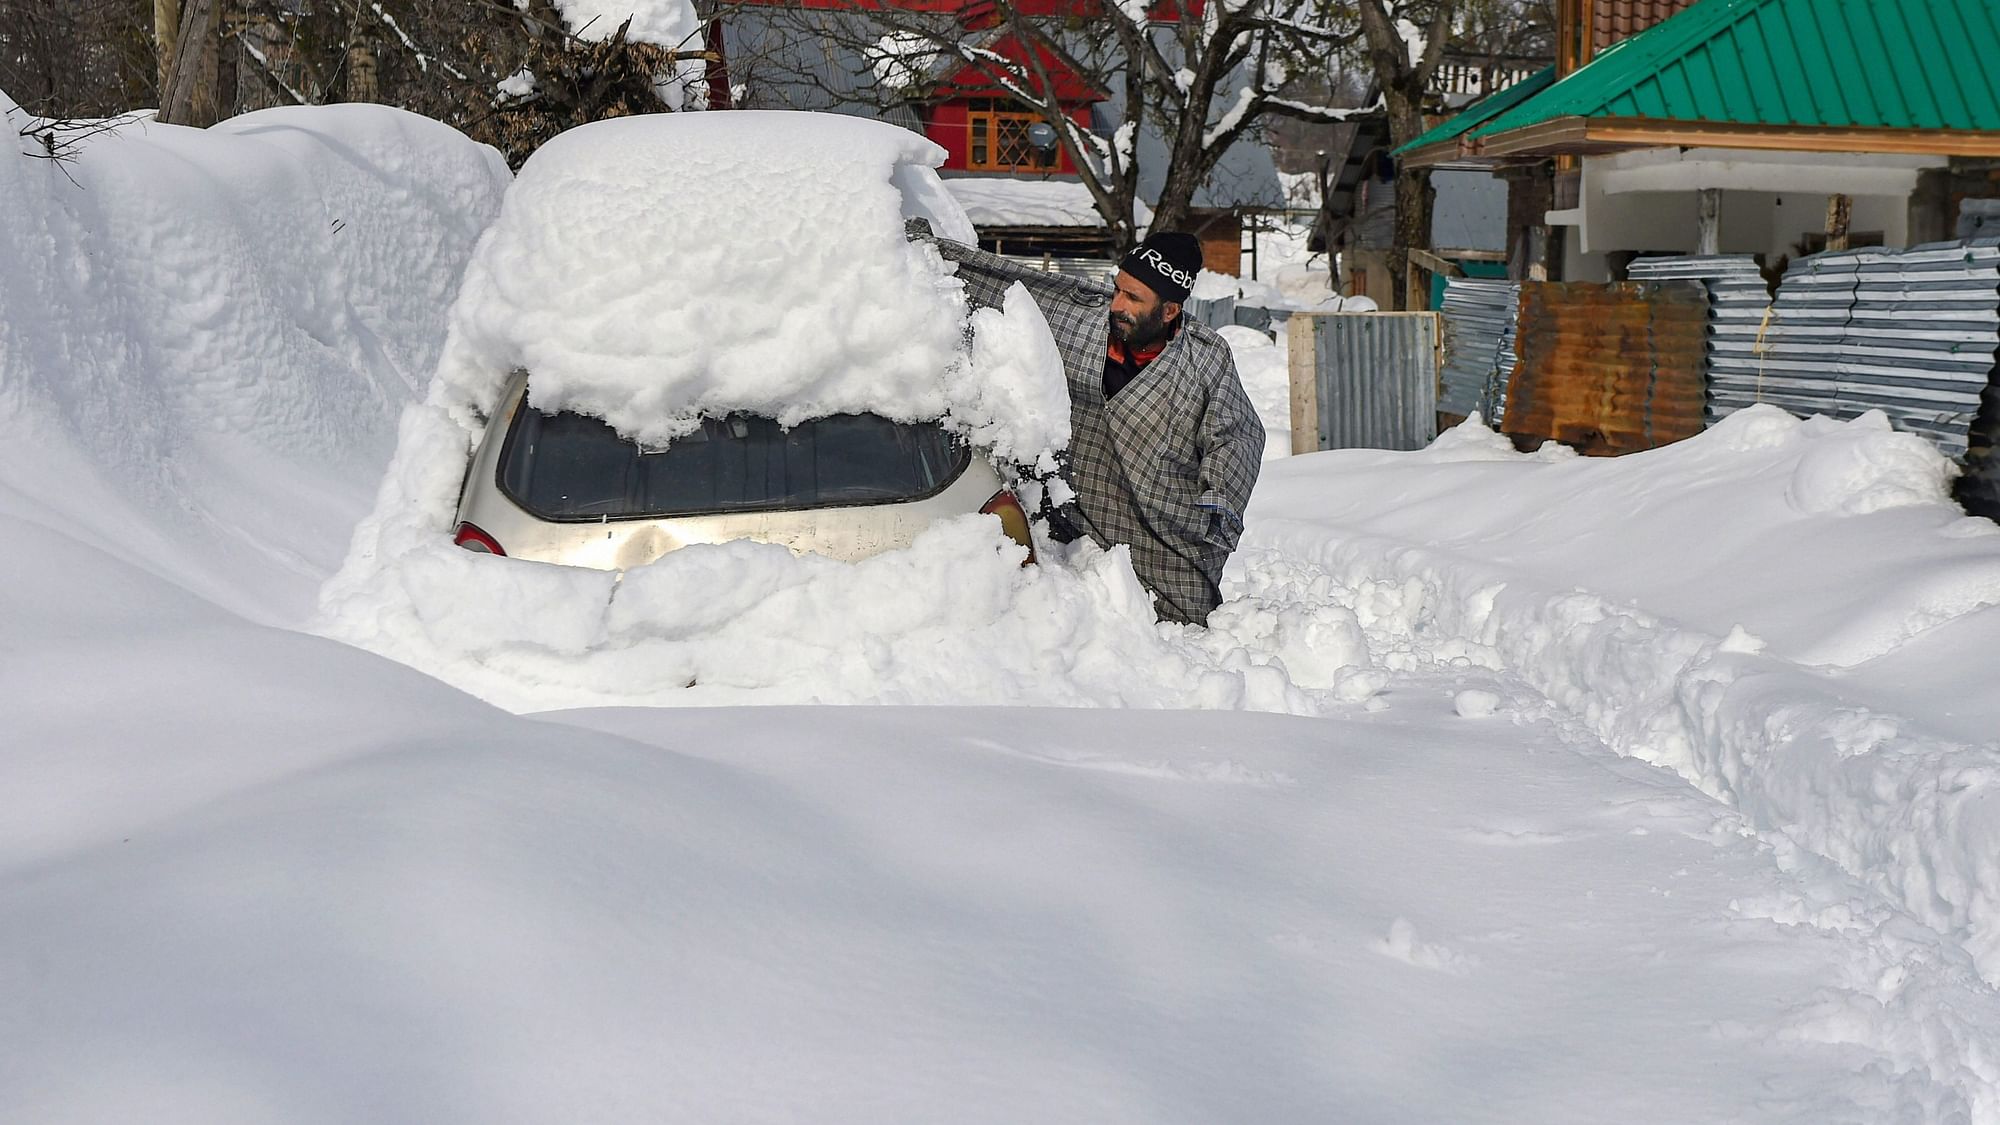 The Jammu-Srinagar national highway has been closed for last four days due to heavy snowfall.